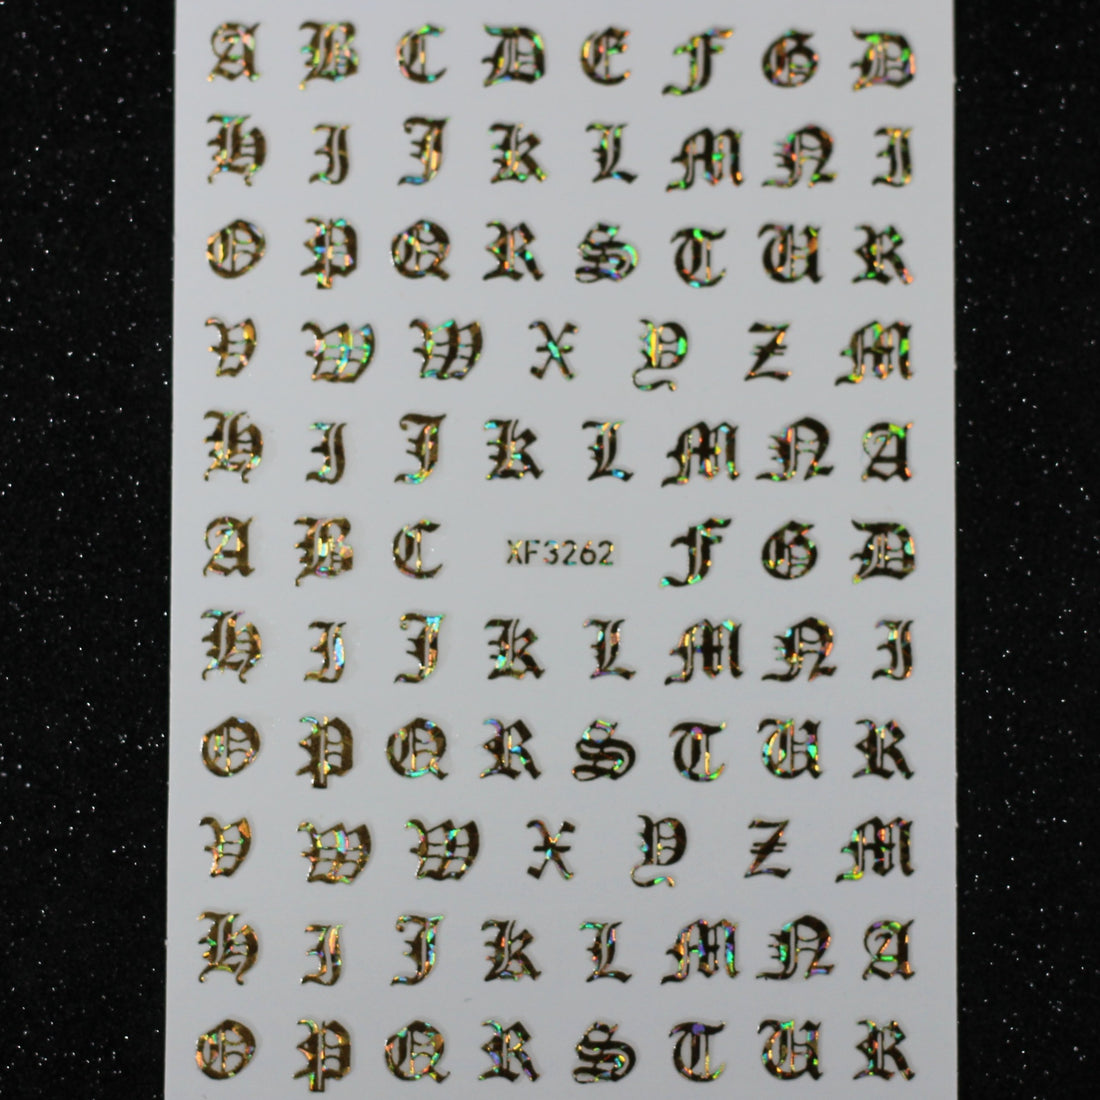 Amazon.com: Letter Nail Art Stickers Alphabet Nail Decals Nail Art Supplies  3D Holographic Old English Character Self-Adhesive Sticker Glitter Design  for Acrylic Nails Decorations Accessories 8 Sheets : Beauty & Personal Care